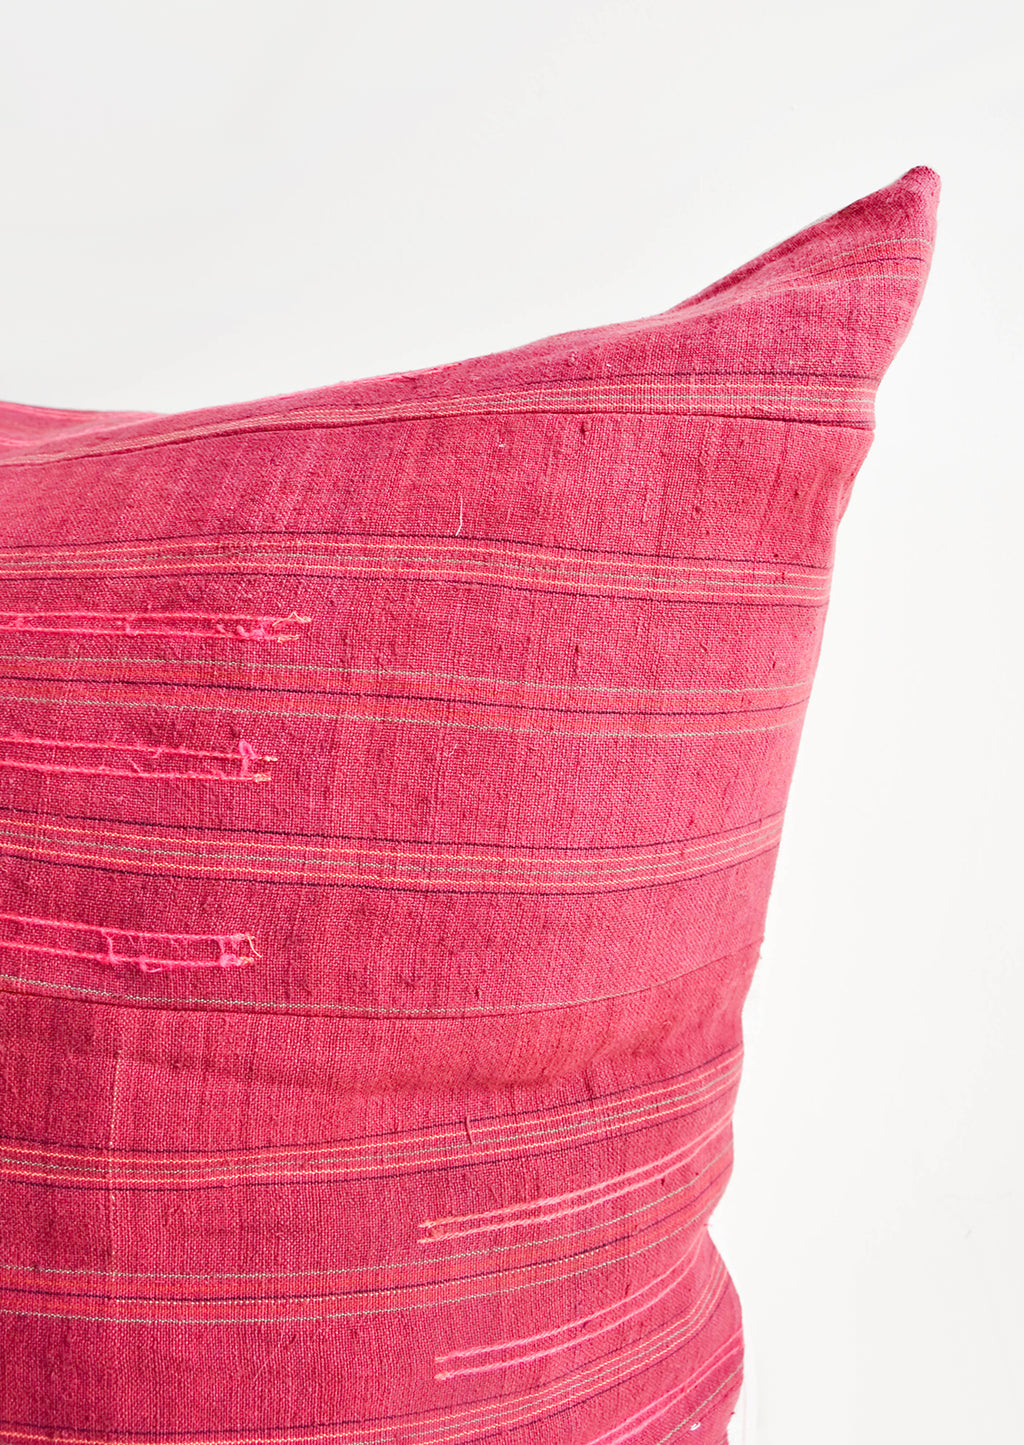 2: Detail of Wine Colored Recycled Thai Fabric Square Throw Pillow with Hot Pink Embroidery Detailing